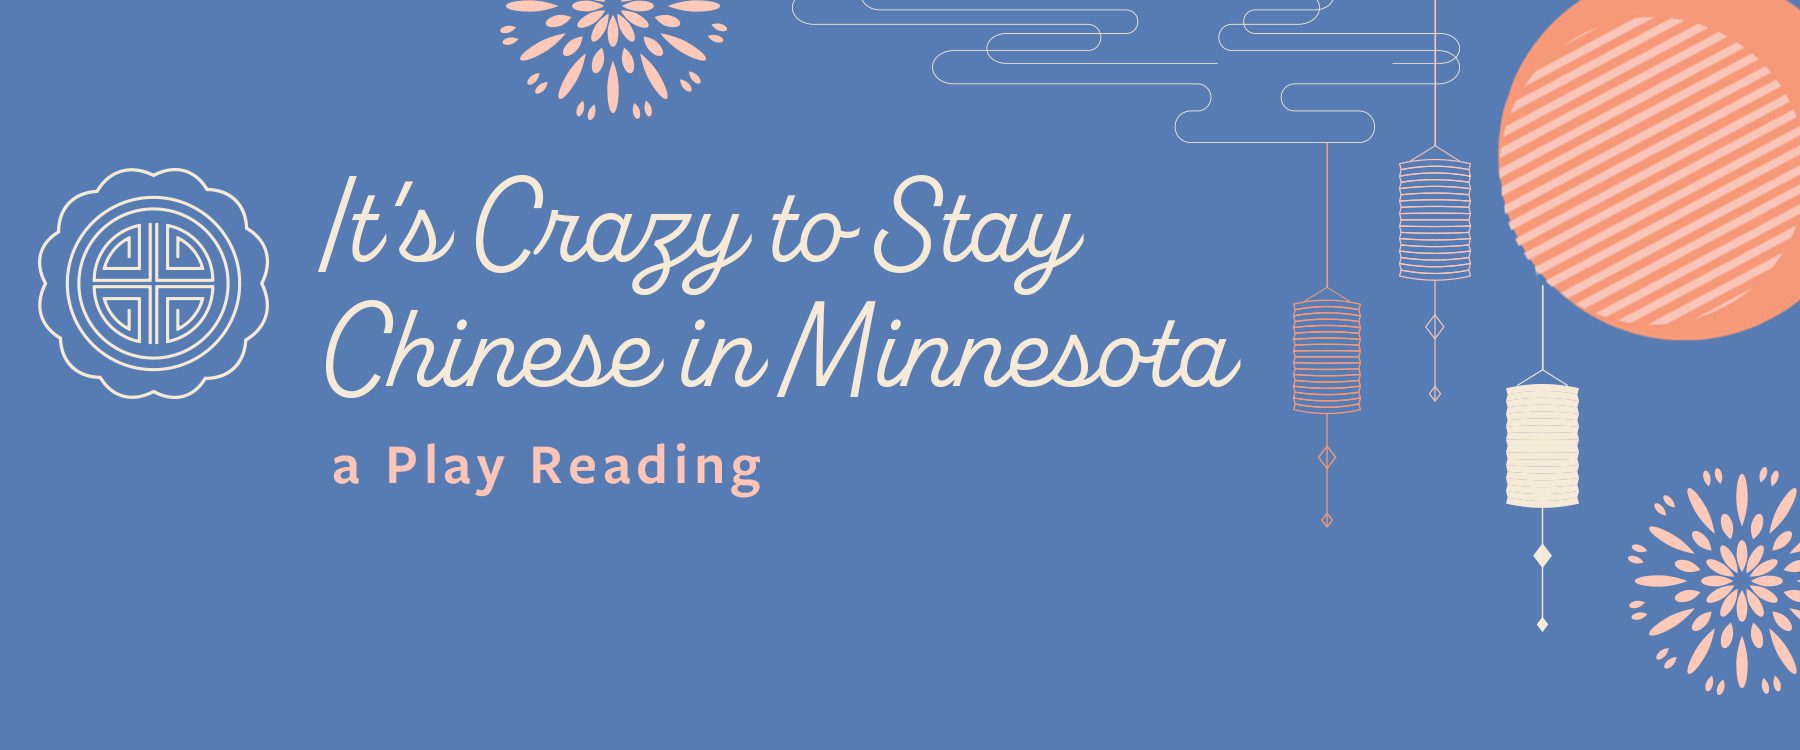 It's Crazy to Stay Chinese in Minnesota Play Reading